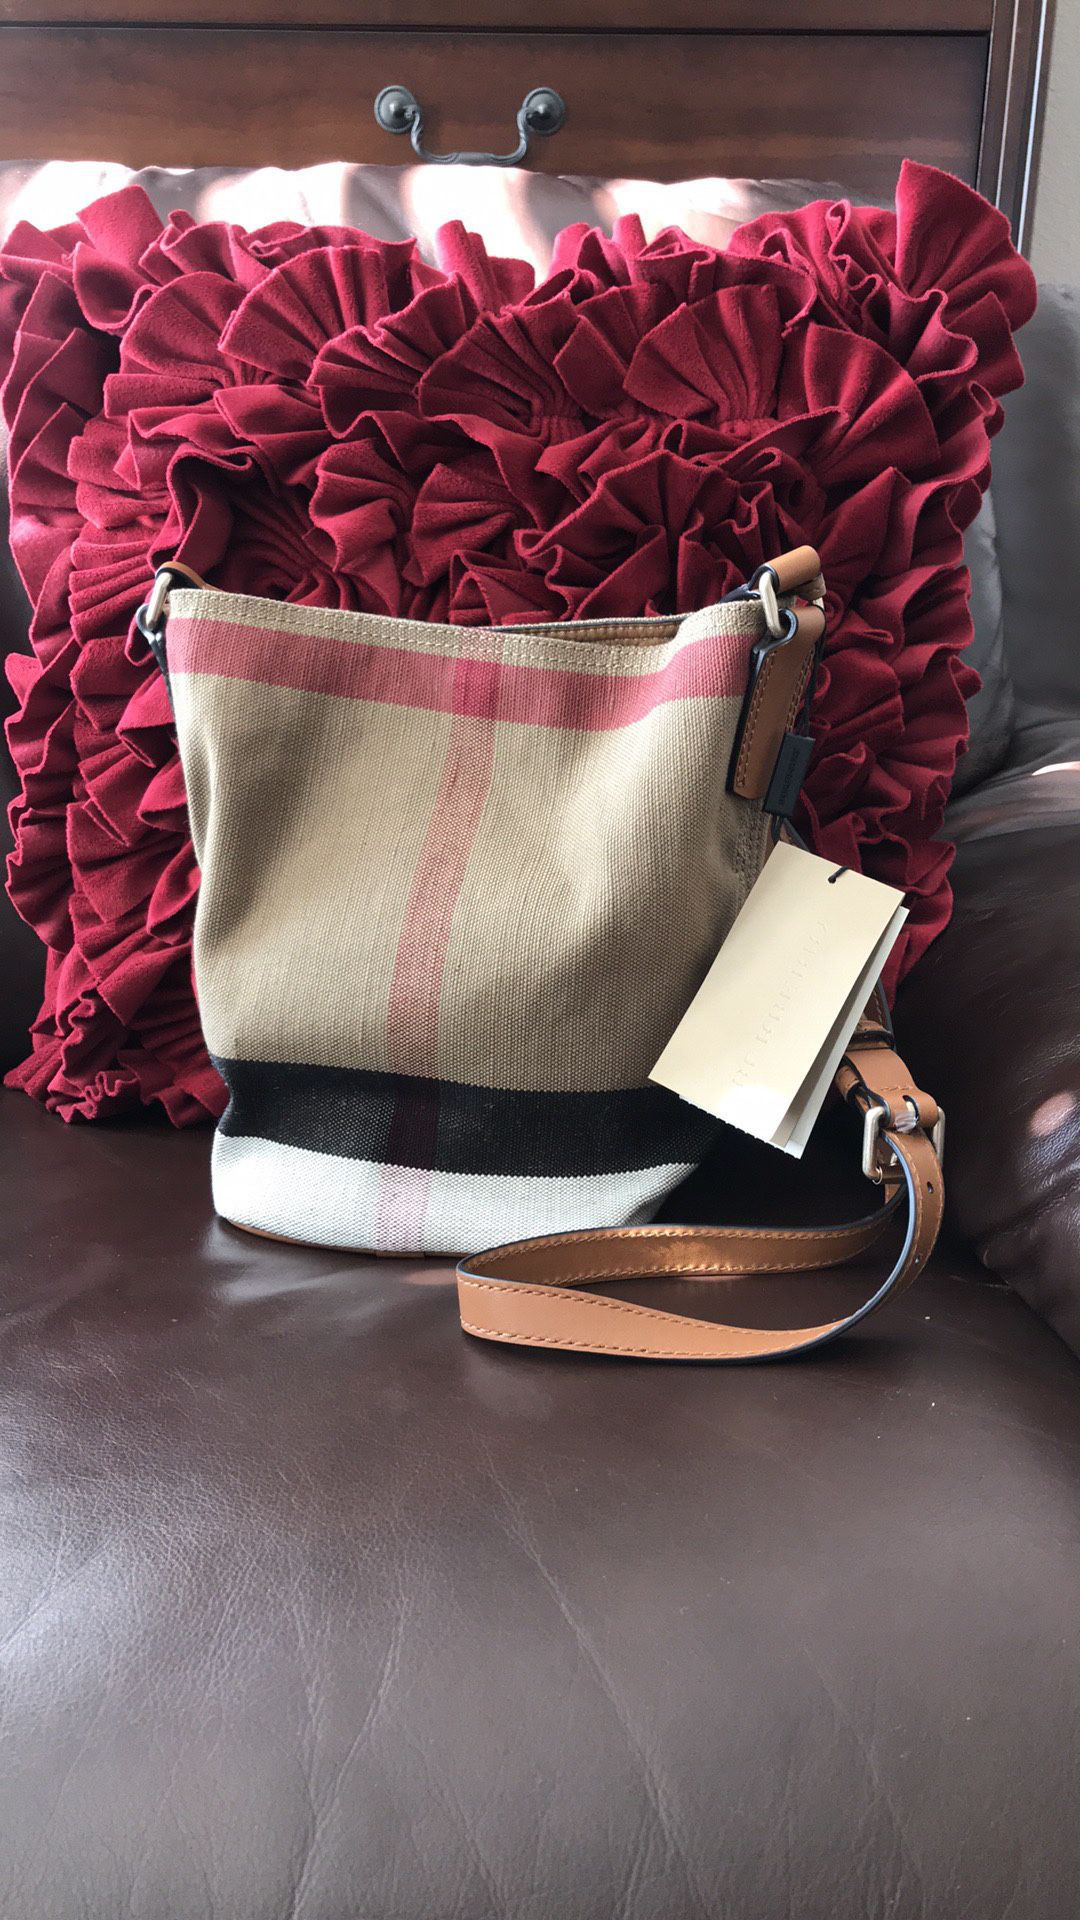 Burberry Mini Ashby Check Saddle Brown Canvas and Leather Cross Body Bag. With dust bag Authentic New and never has been used This bag has pouch,